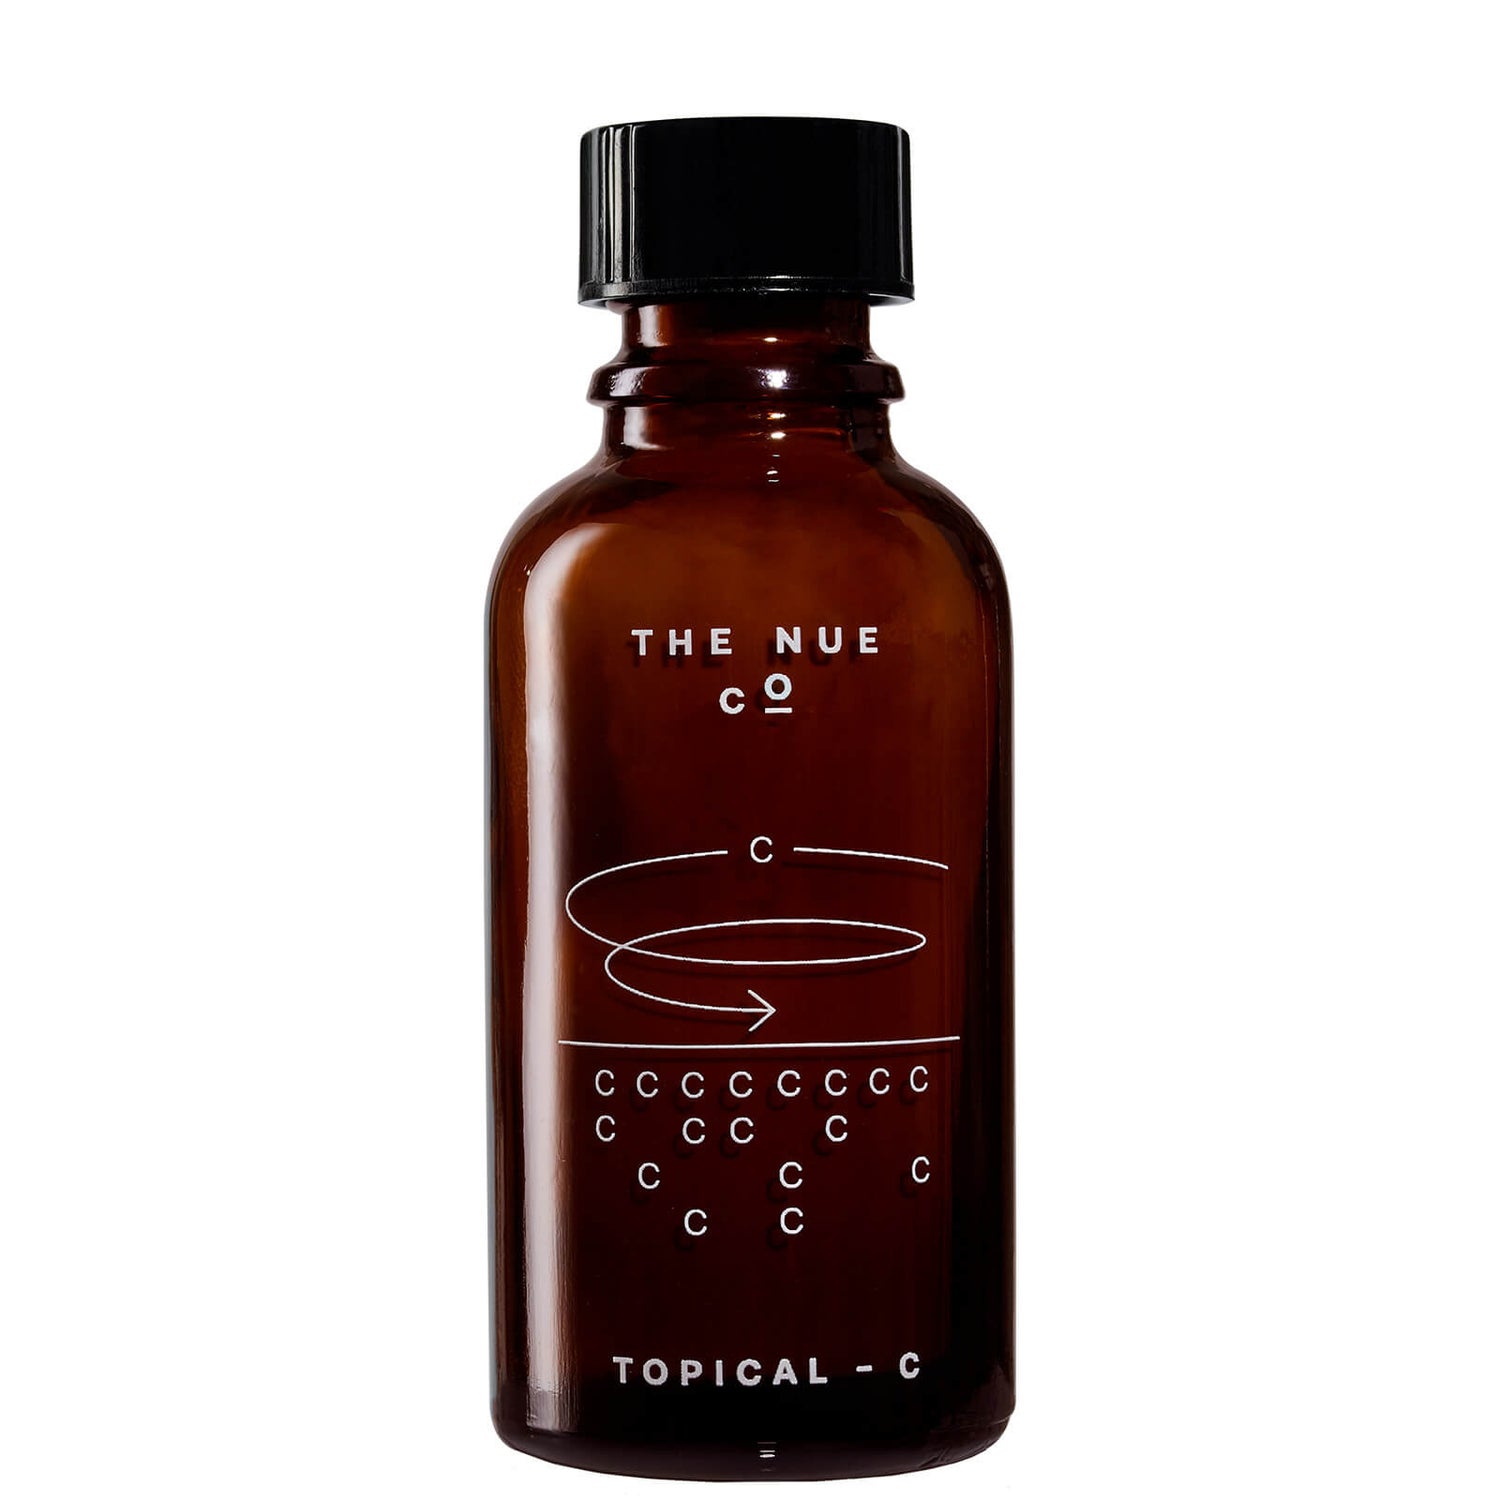 The Nue Co. Topical - C 0.49 oz